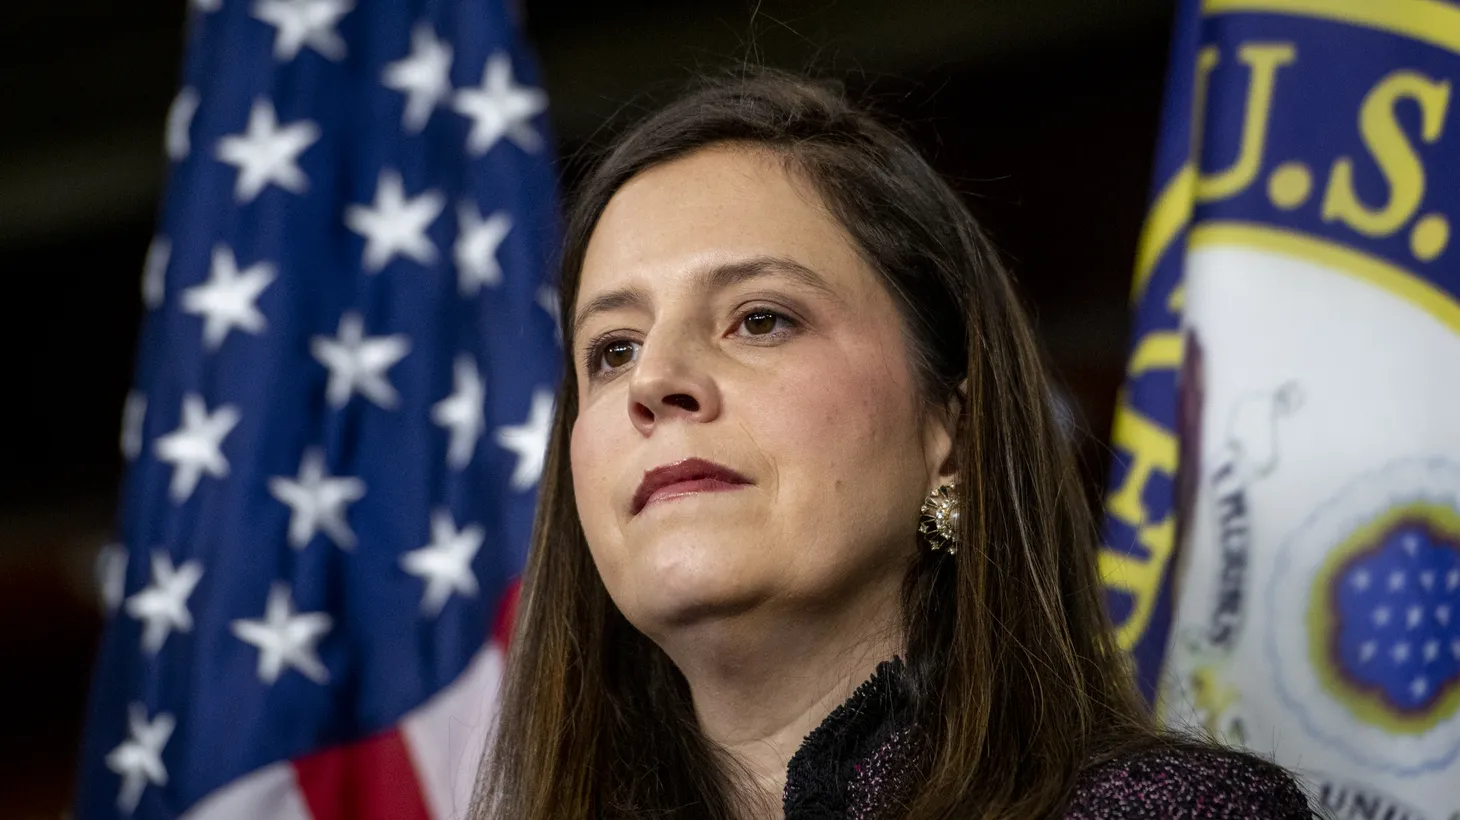 Rep. Elise Stefanik (Republican of New York) listens to remarks during a press conference at the U.S. Capitol in Washington, DC, January 10, 2023.